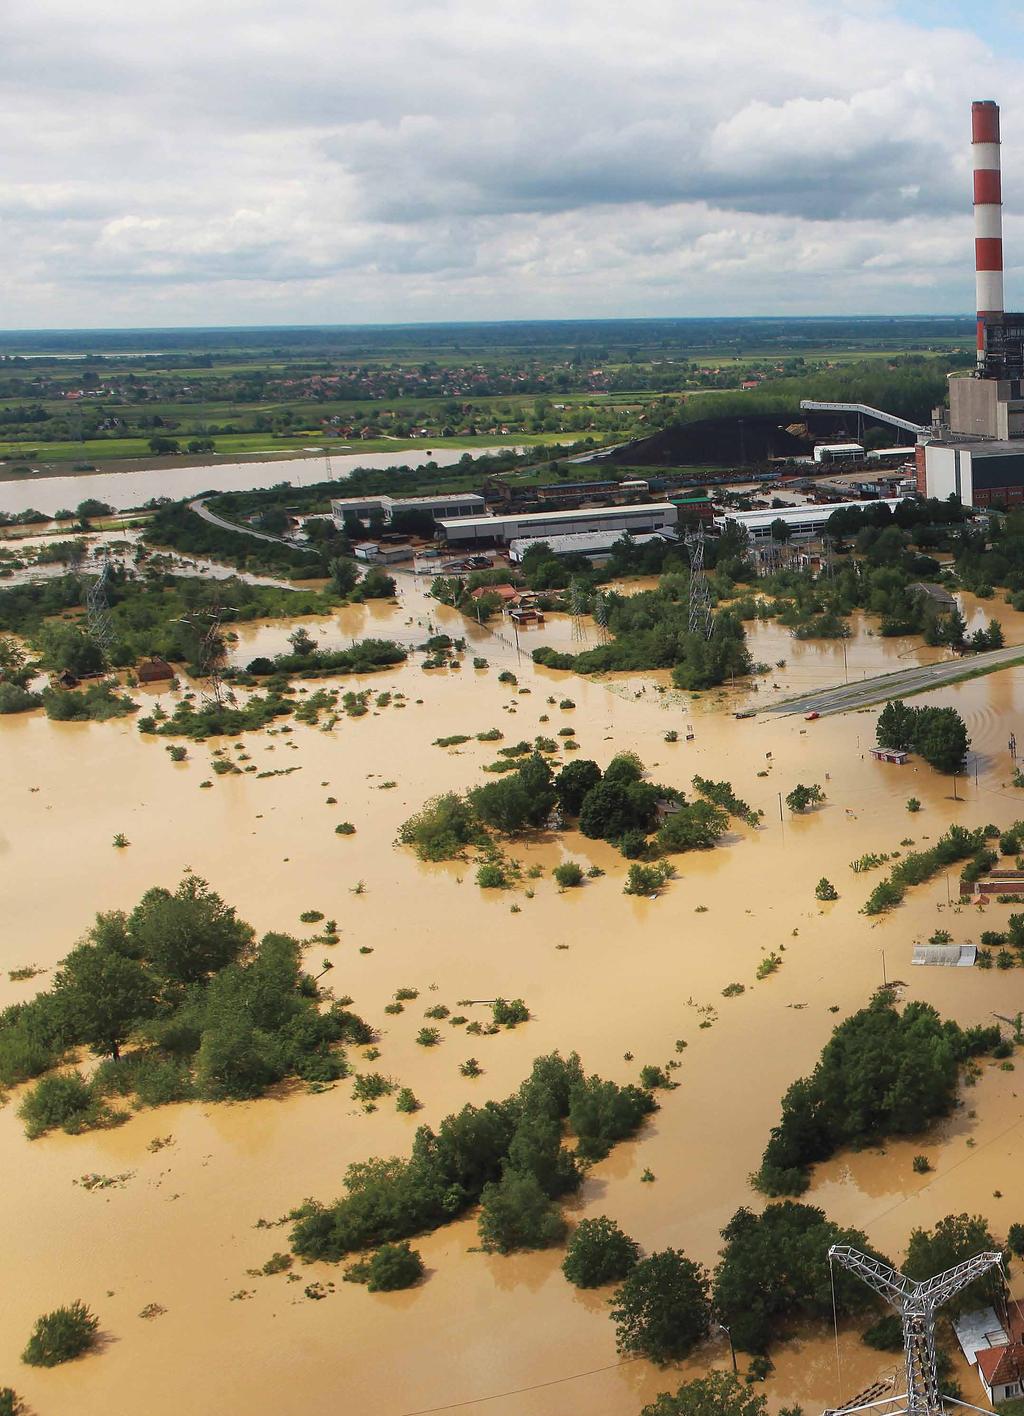 Floods in the Balkans In the spring of 2014, nature demonstrated its power as a deluge of rain led to landslides and massive flooding across Serbia, Bosnia-Herzegovina and Croatia, killing dozens of